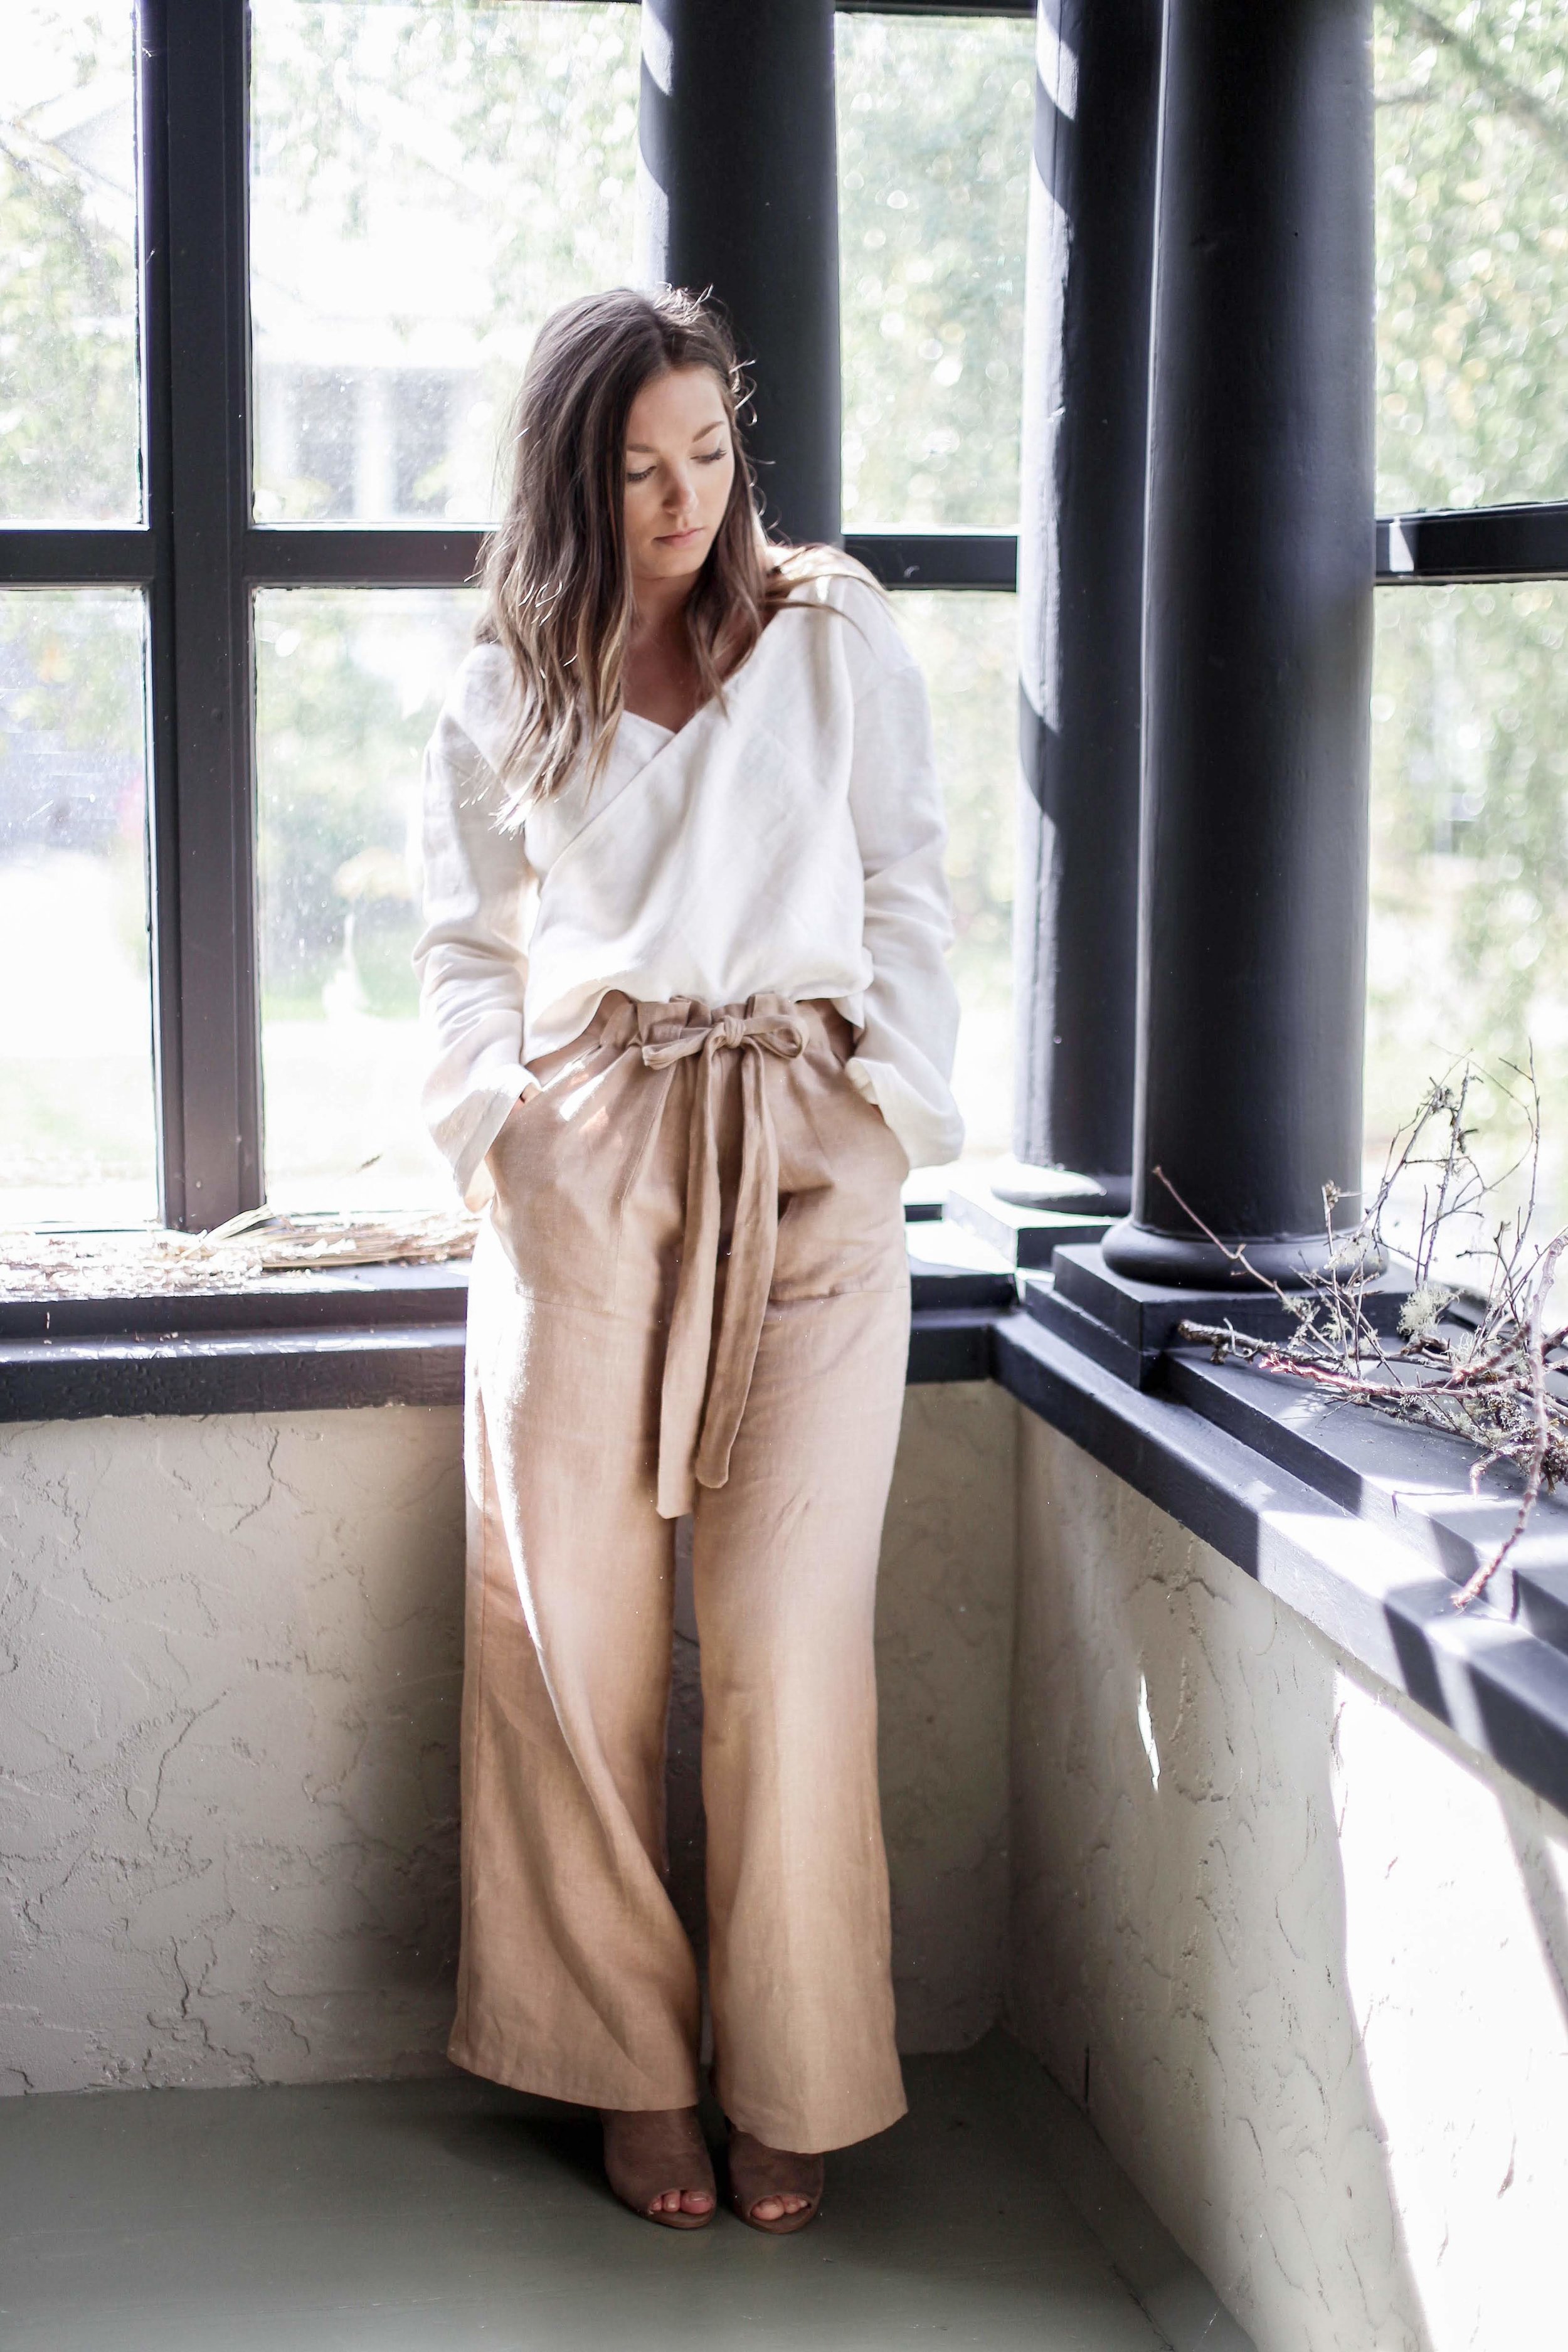 nomi-designs_maya-pants_camel-colored_natural-linen-pants-with-pockets-and-tie_styled-with-white-linen-top.jpg